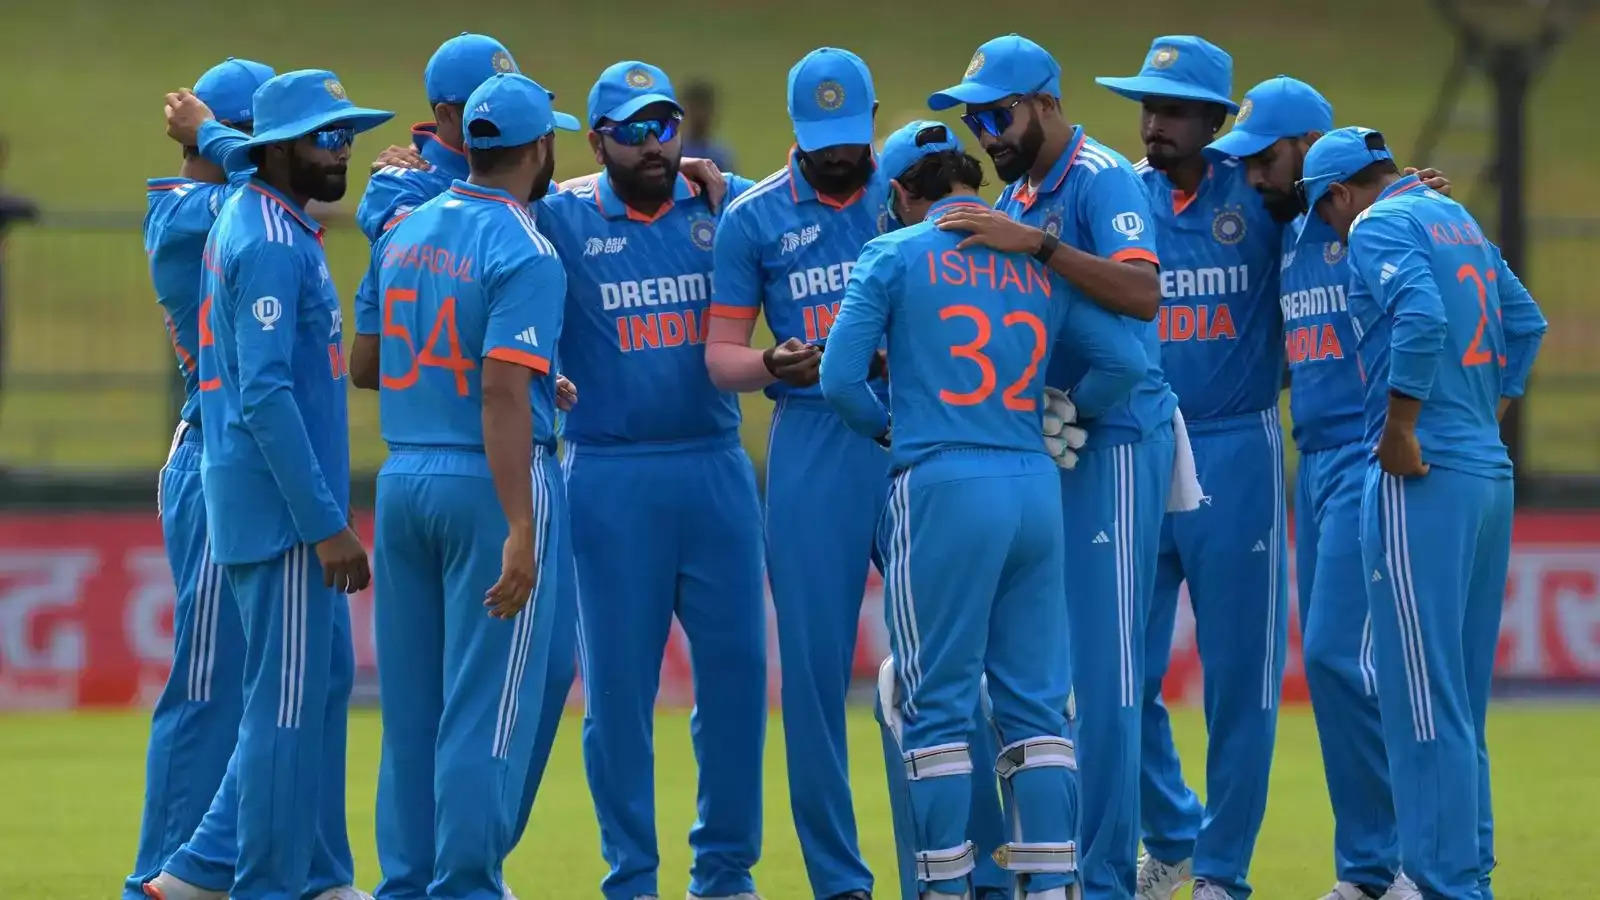 Team India is in good form.